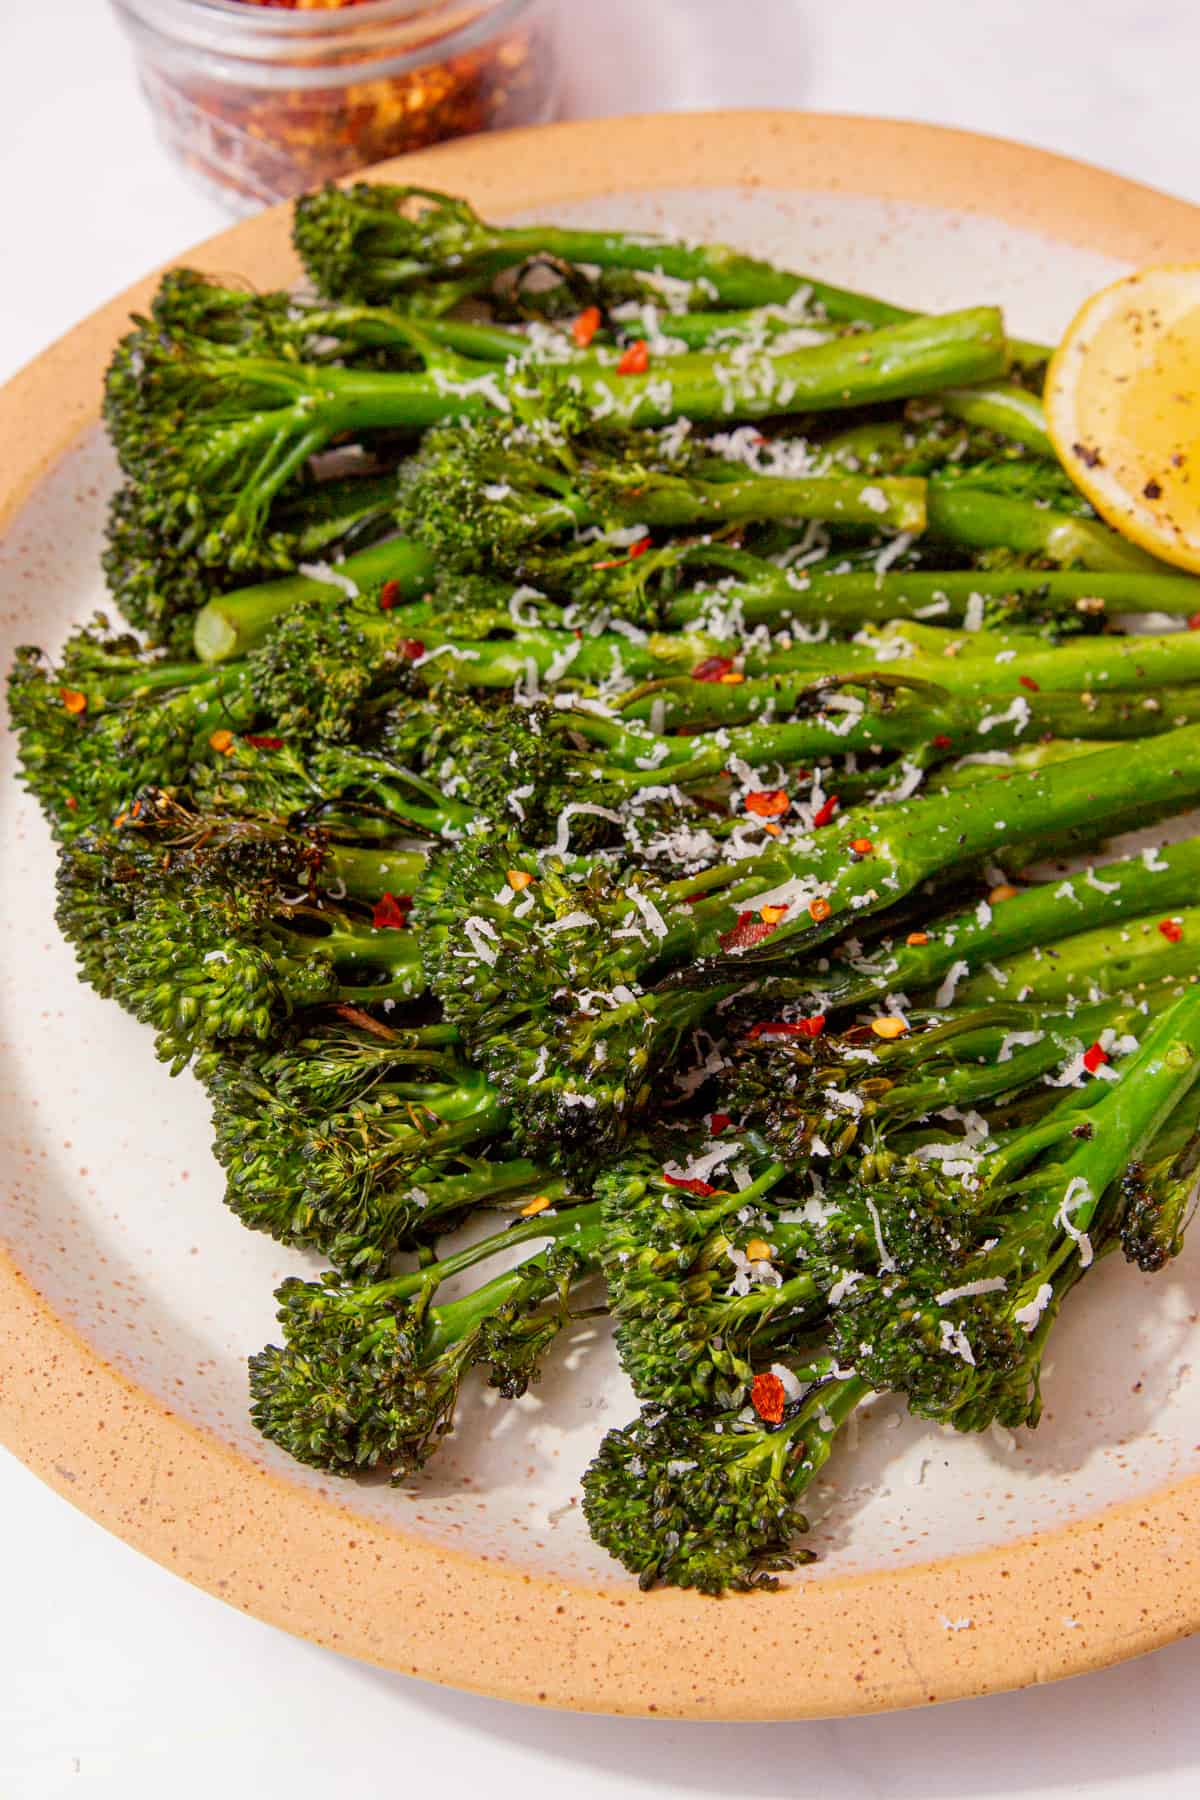 Tenderstem broccoli displayed on a plate with a wedge of lemon and topped with lots of chilli flakes and a small bowl of chilli flakes in partial view.